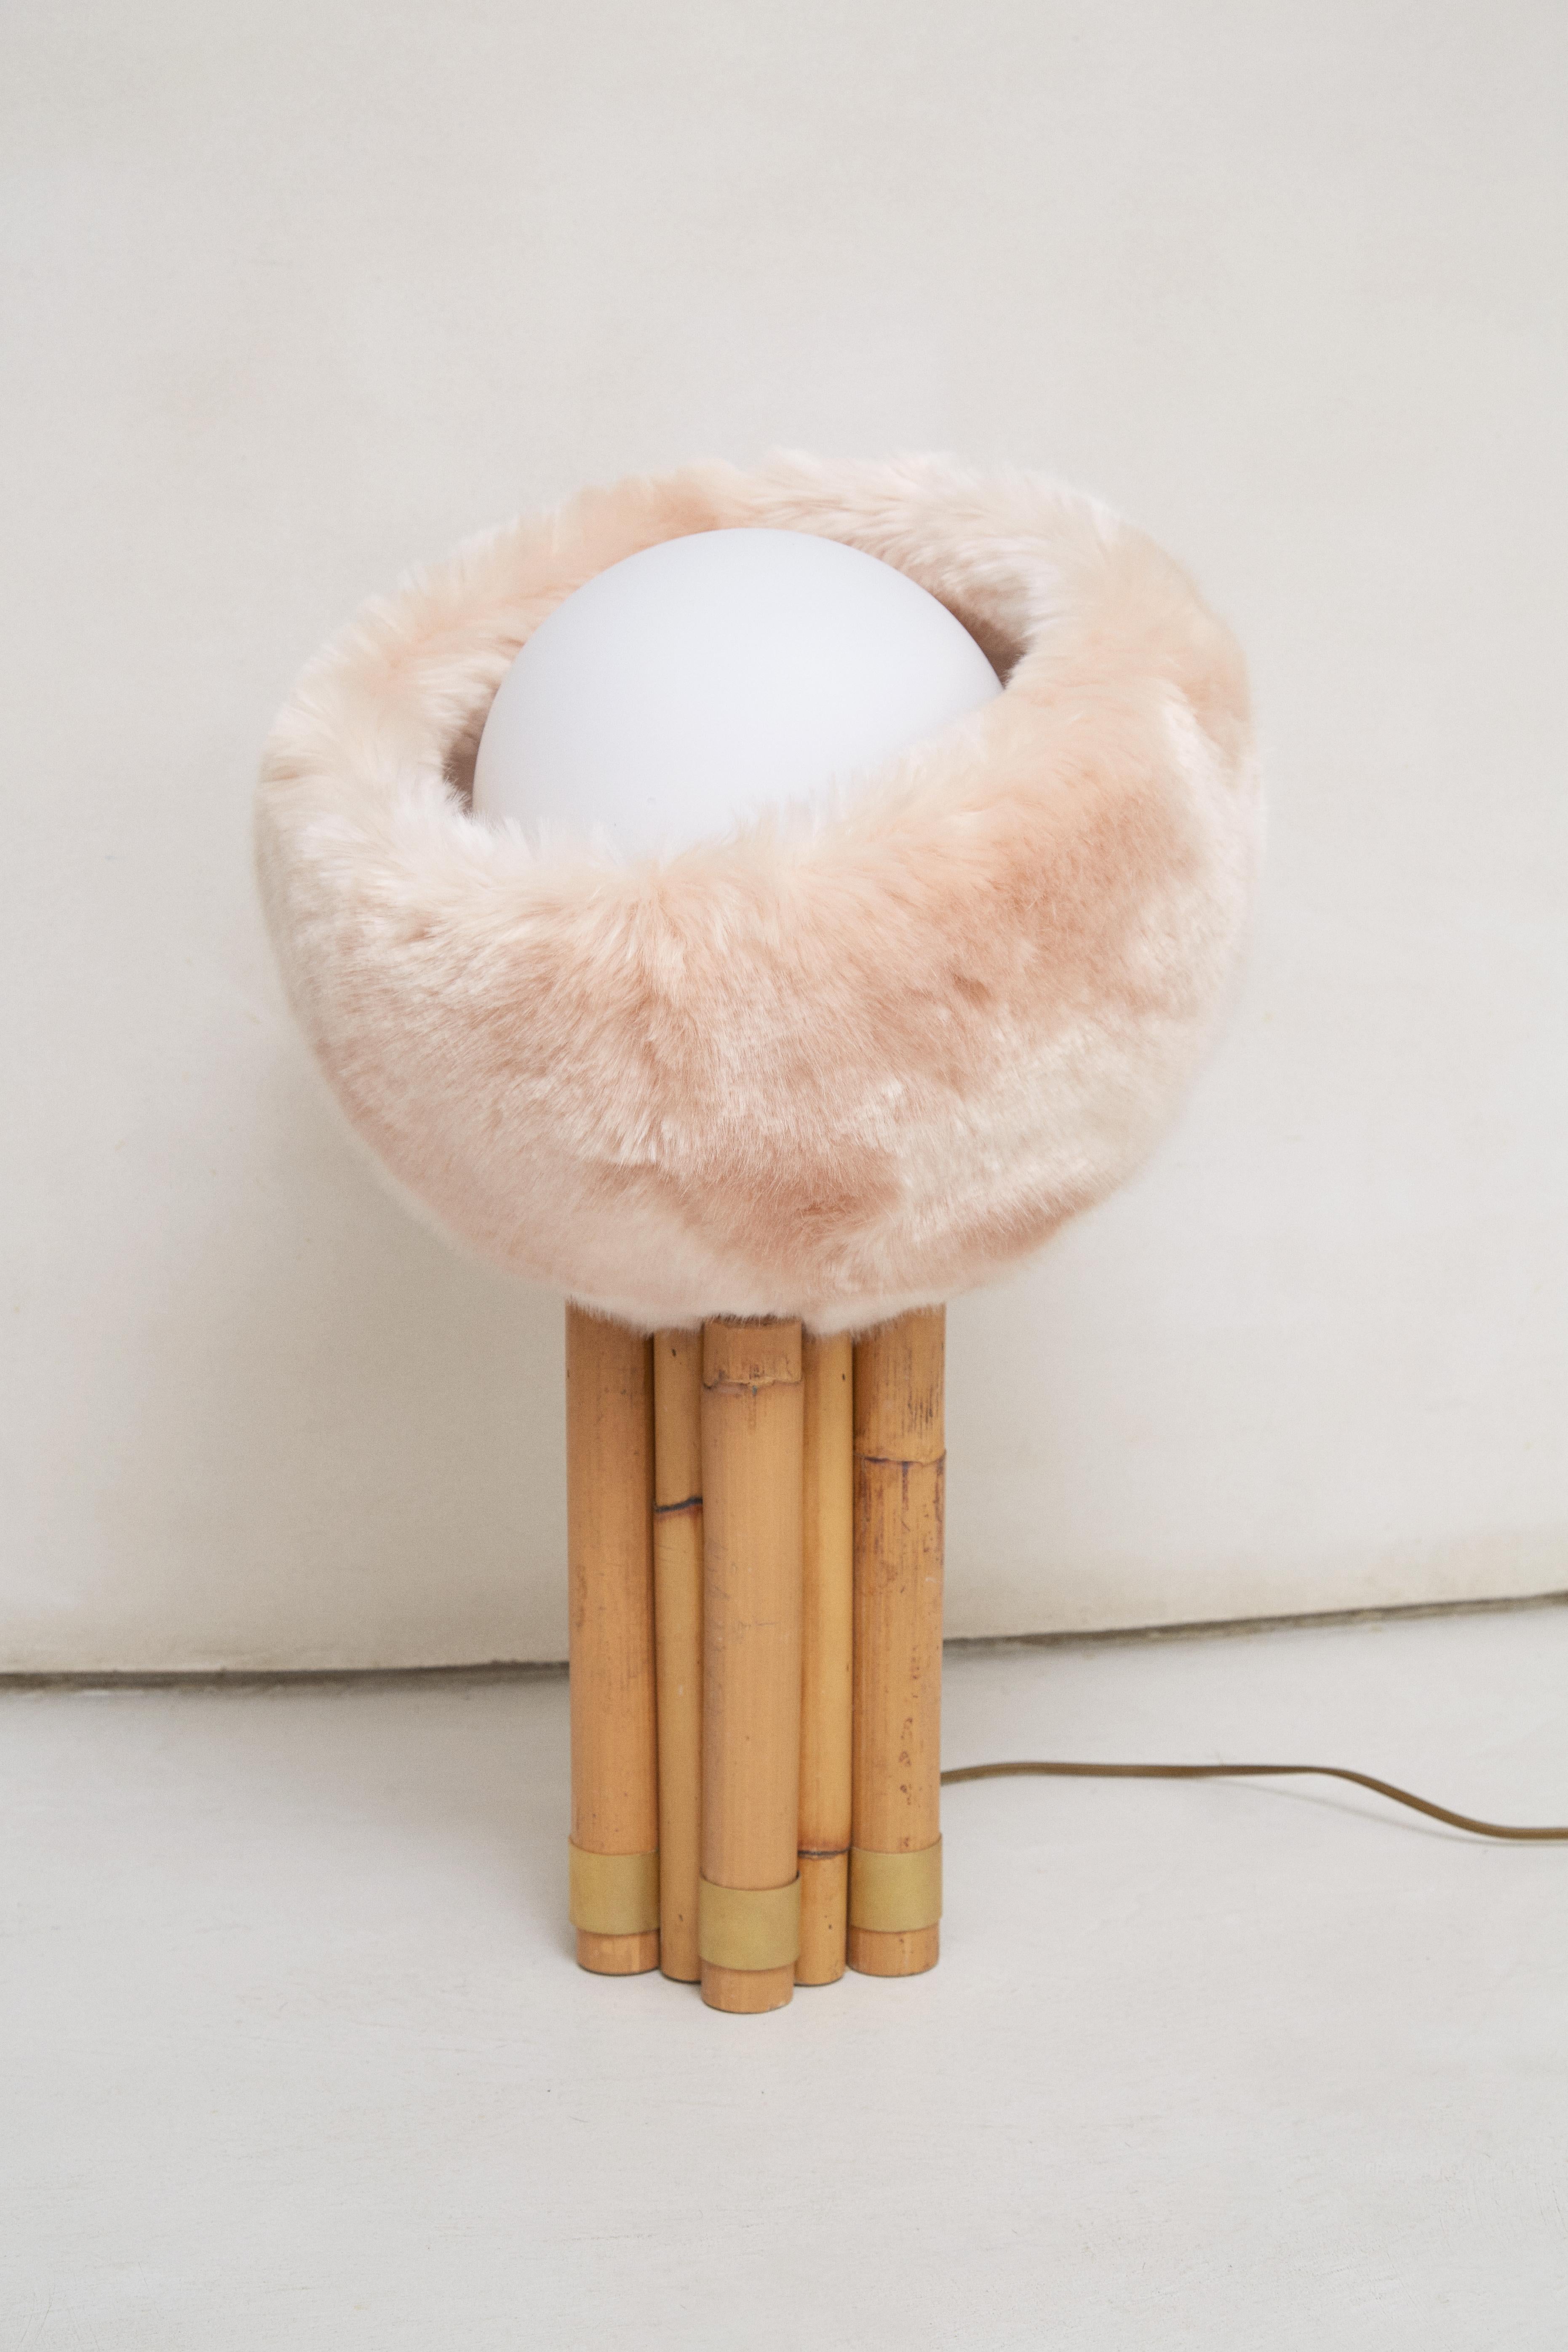 Dynamite Table Lamp by Patricia Bustos de la Torre
Dimensions: D 32 x W 35 x H 52 cm.
Materials: White opal glass, rattan and plush.

The dynamite lamp is the most emphatic of all. Hair, opal ball and a rattan
circle that are held together by a